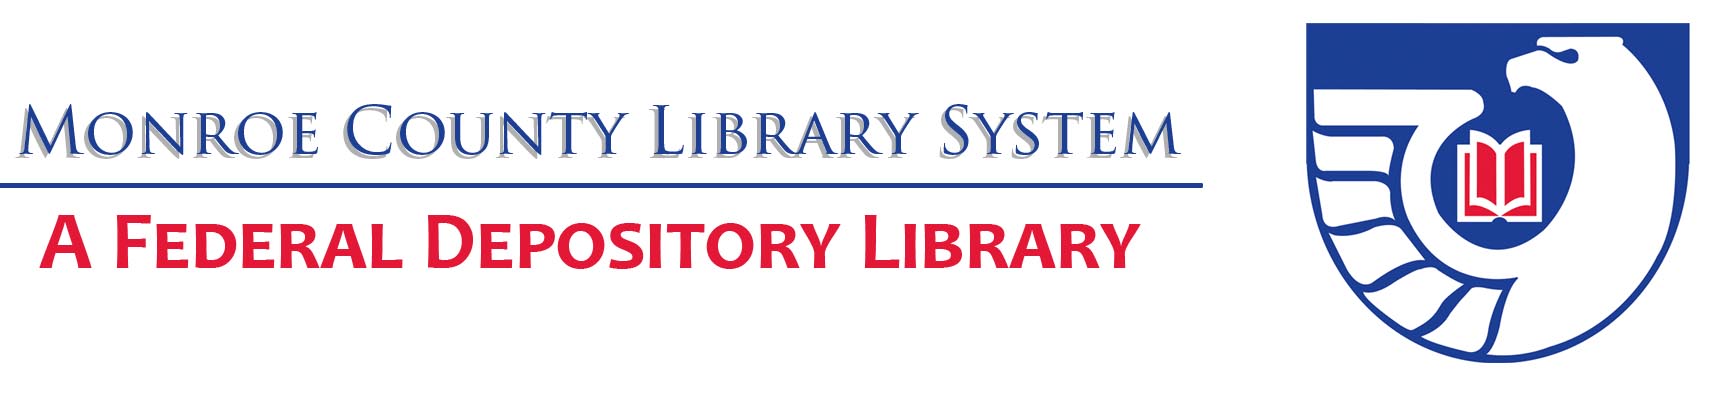 MCLS Federal Depository Library Banner